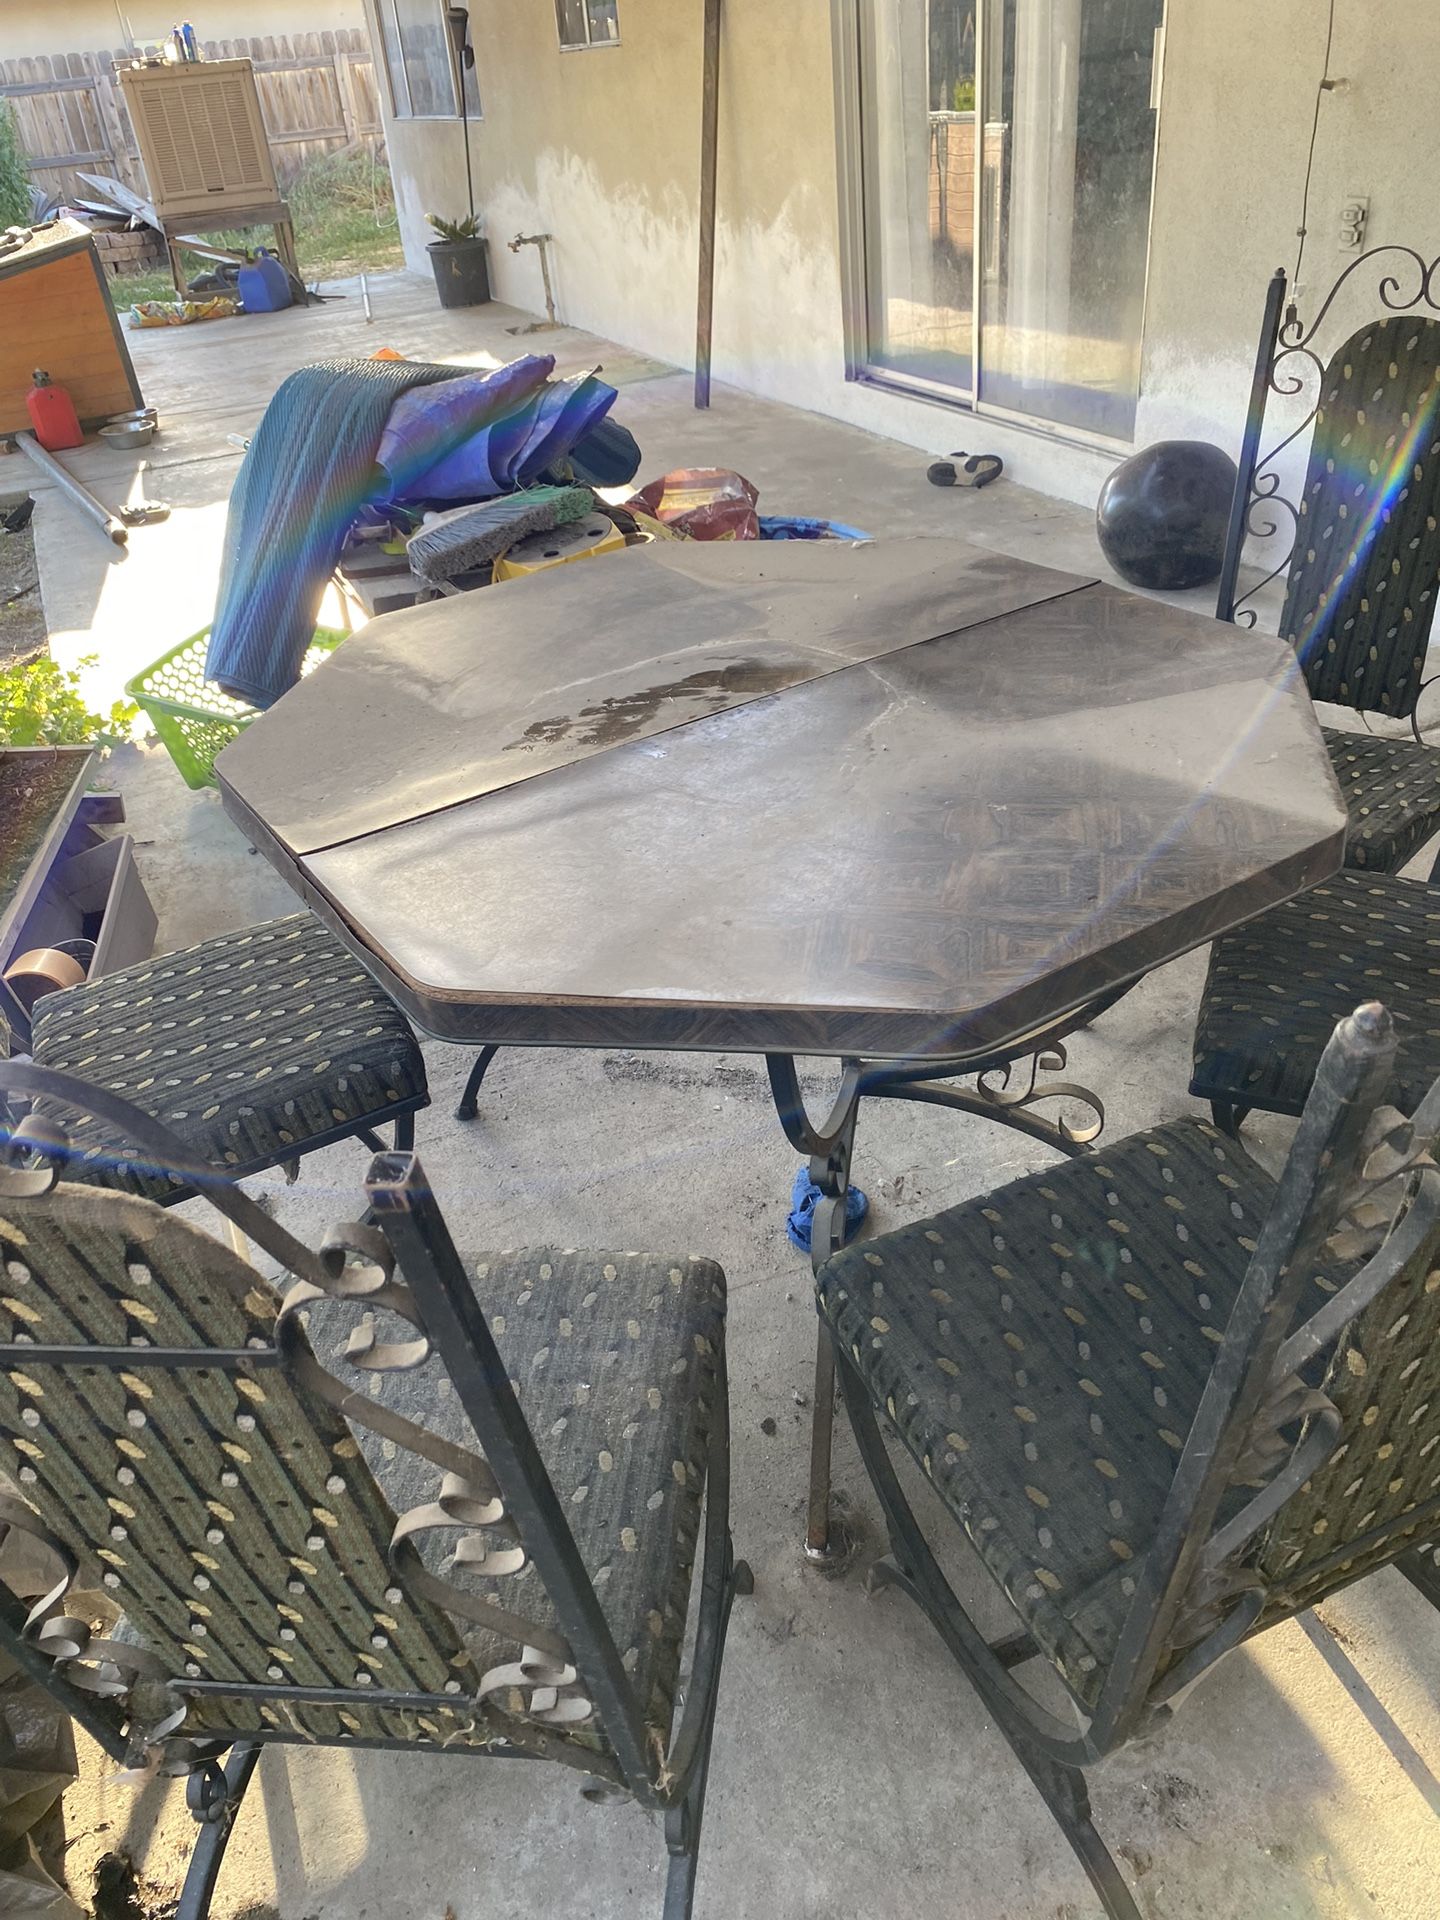 Old Table Free